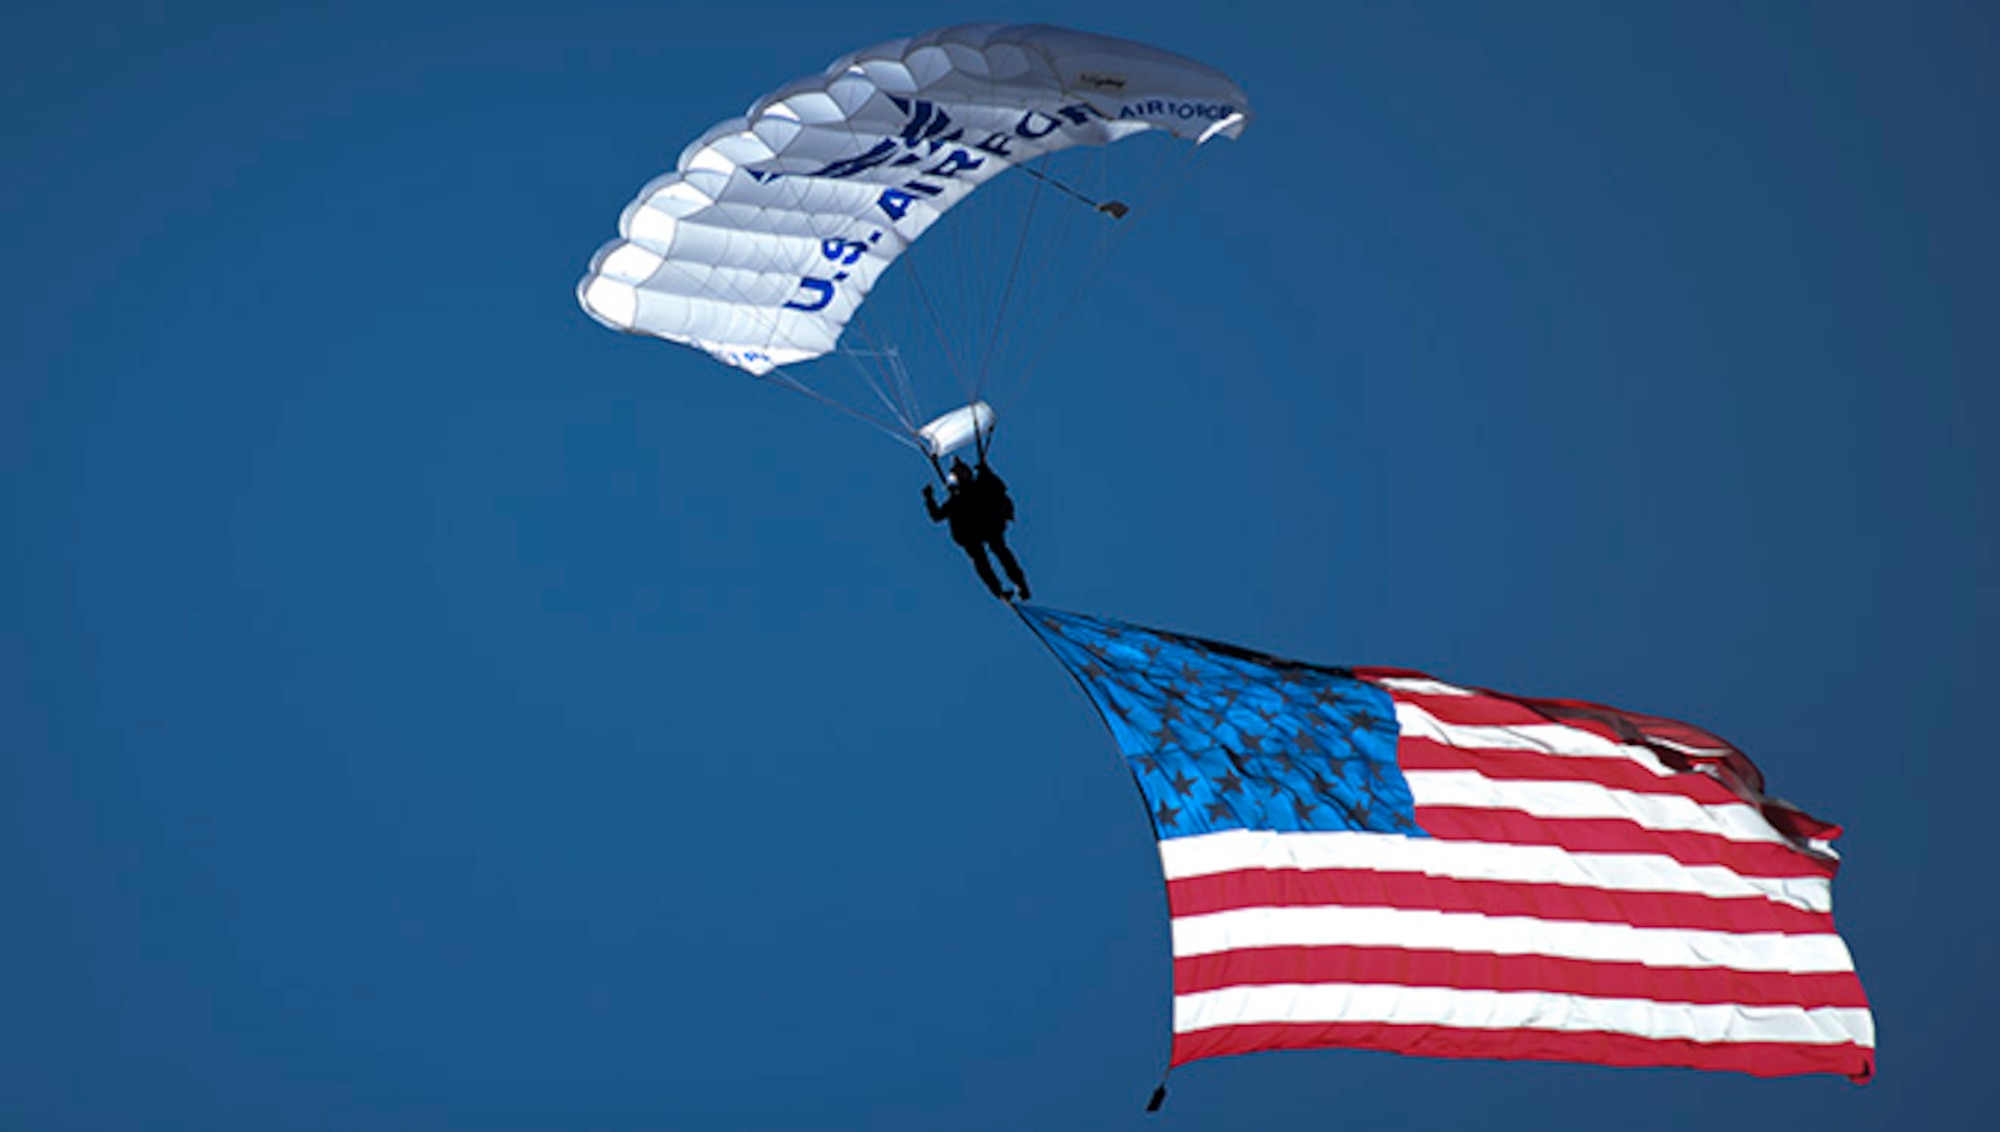 The Academy Sport Parachuting Club officially becomes known as "The Wings of Blue," Jan. 29, 1976. (U.S. Air Force photo)